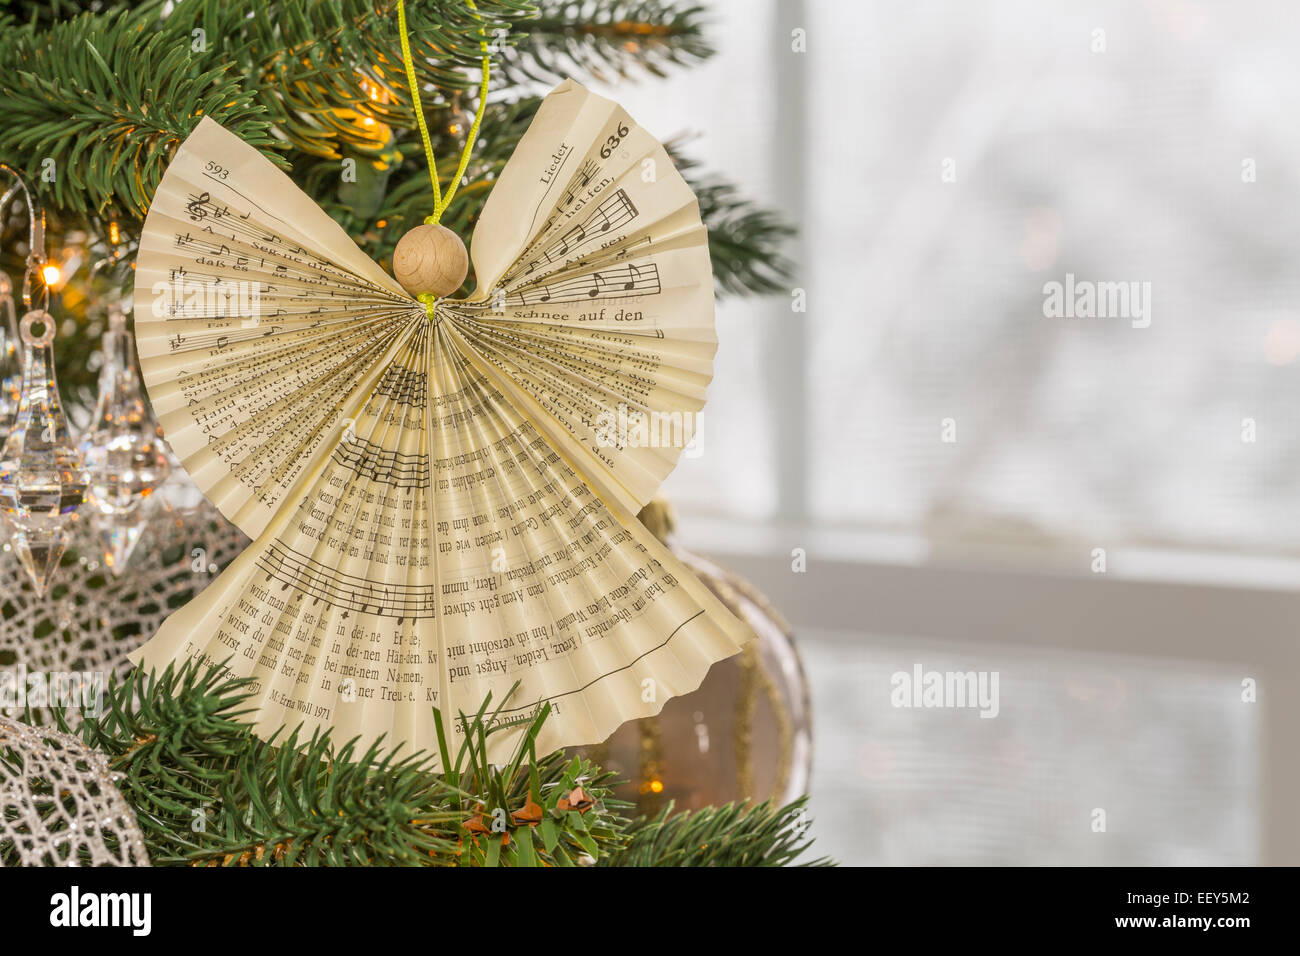 Angel made from folded carol from hymn book on Christmas tree Stock Photo